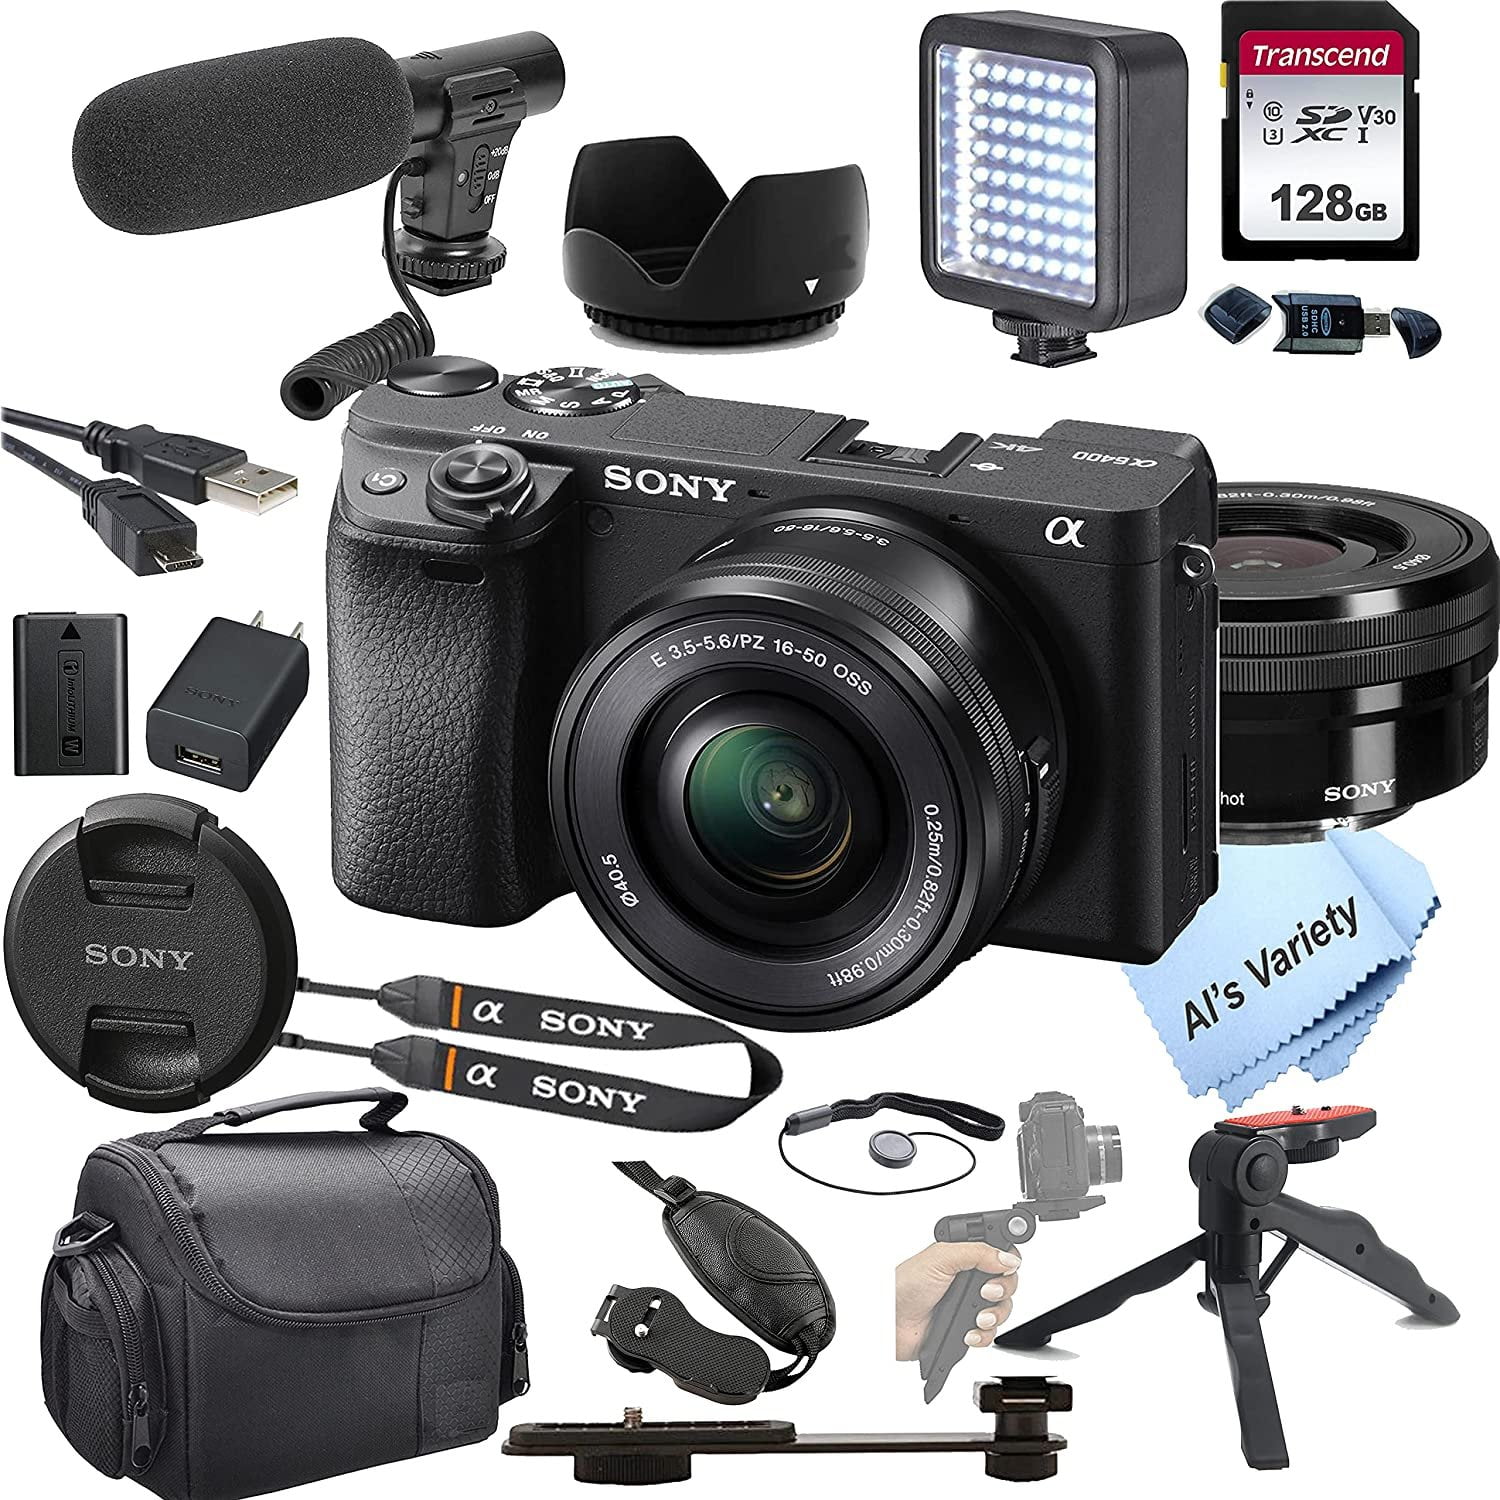 Sony Alpha a6400 Mirrorless Digital Camera with 16-50mm Lens+ Shot-Gun  Microphone + LED Always on Light+ 128GB Card, Gripod, Case, and More 18pc  Video 